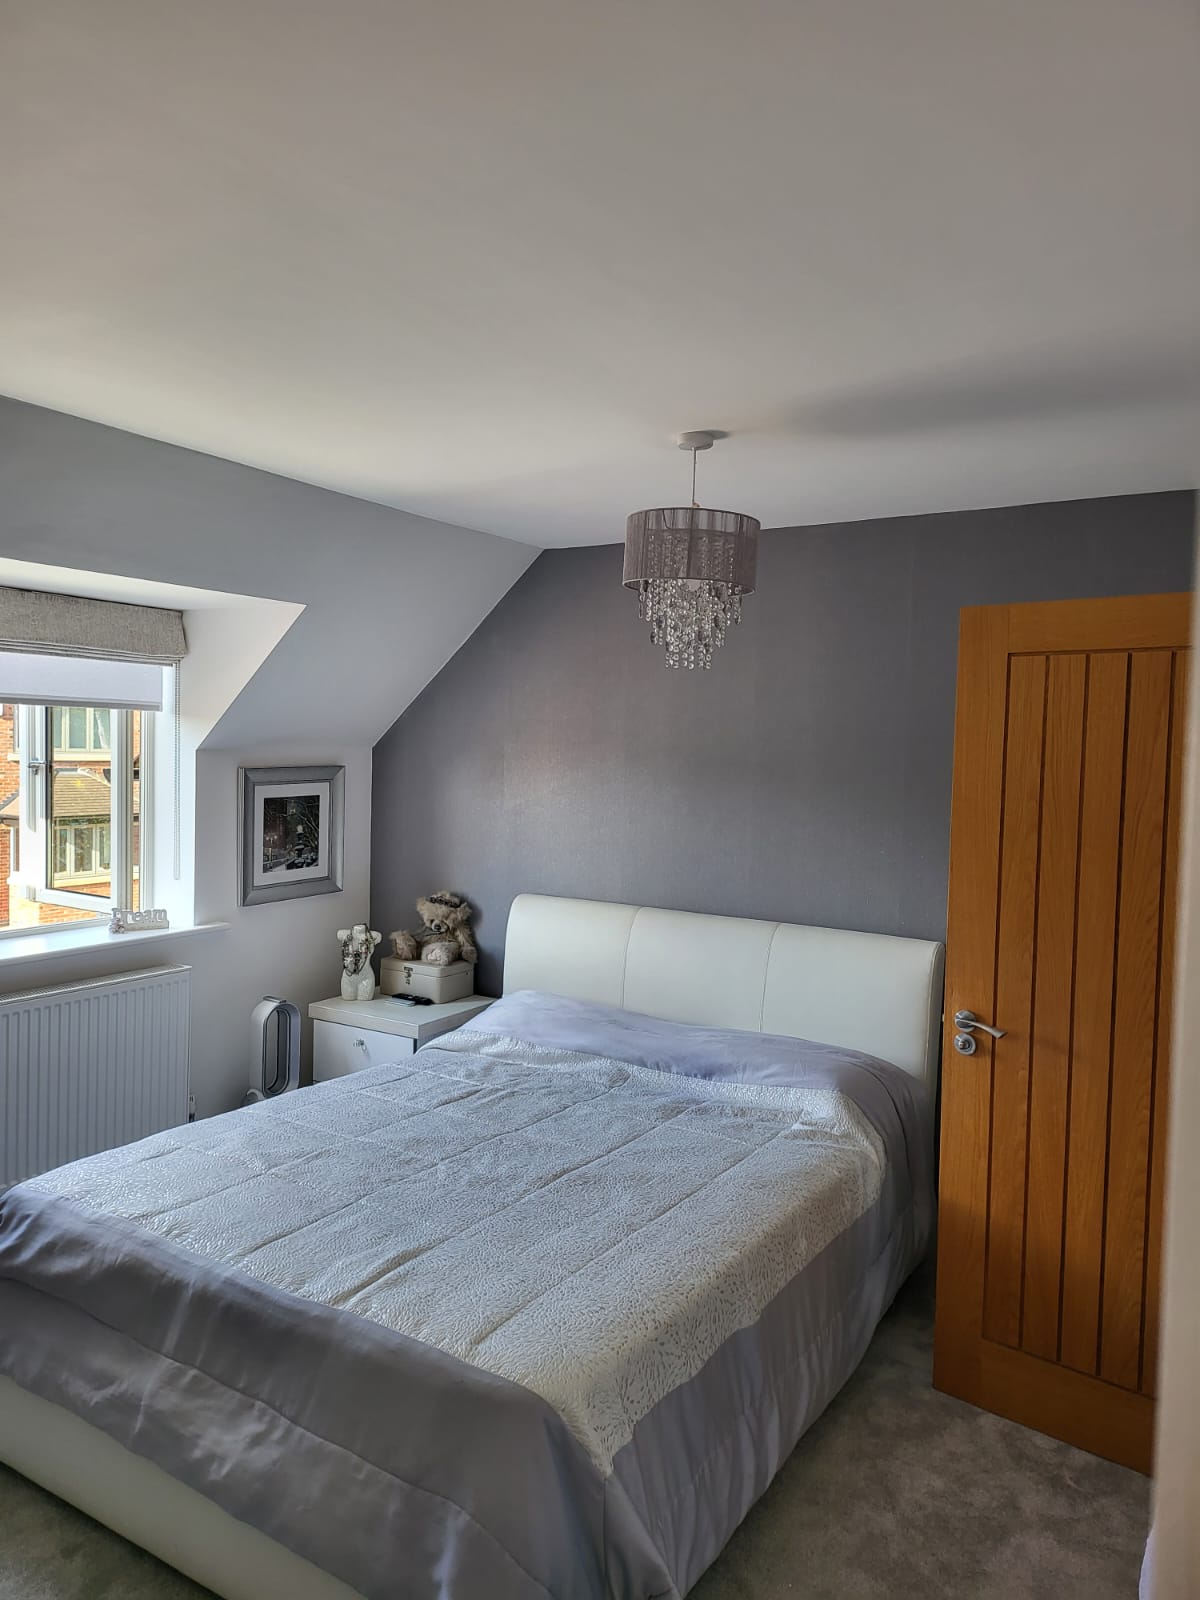 A picture of a bedroom attic room painted in grey by painters and decorators Derby